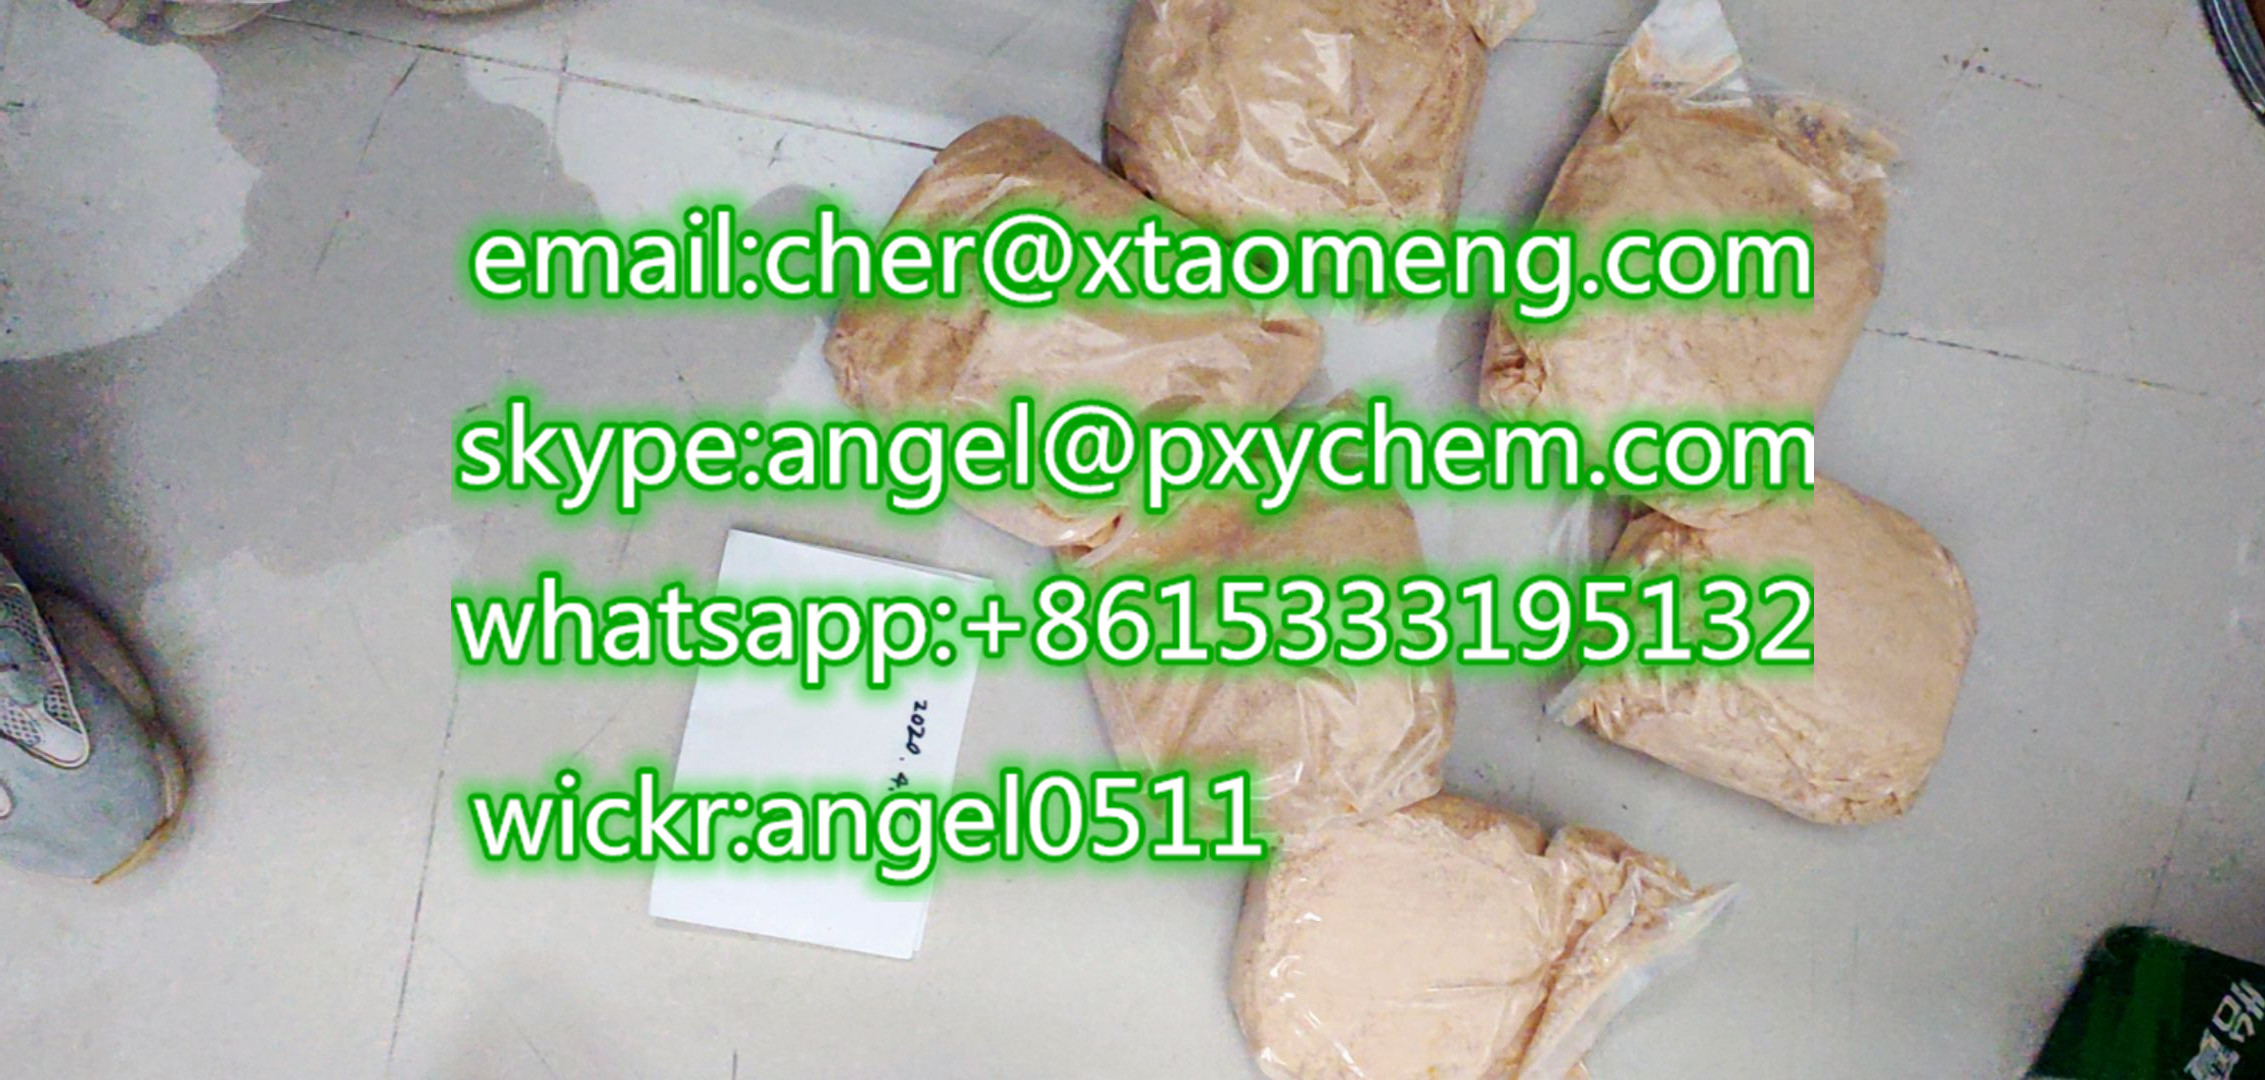 High purity 5FMDMB-2201 for sale(wickr:angel0511)